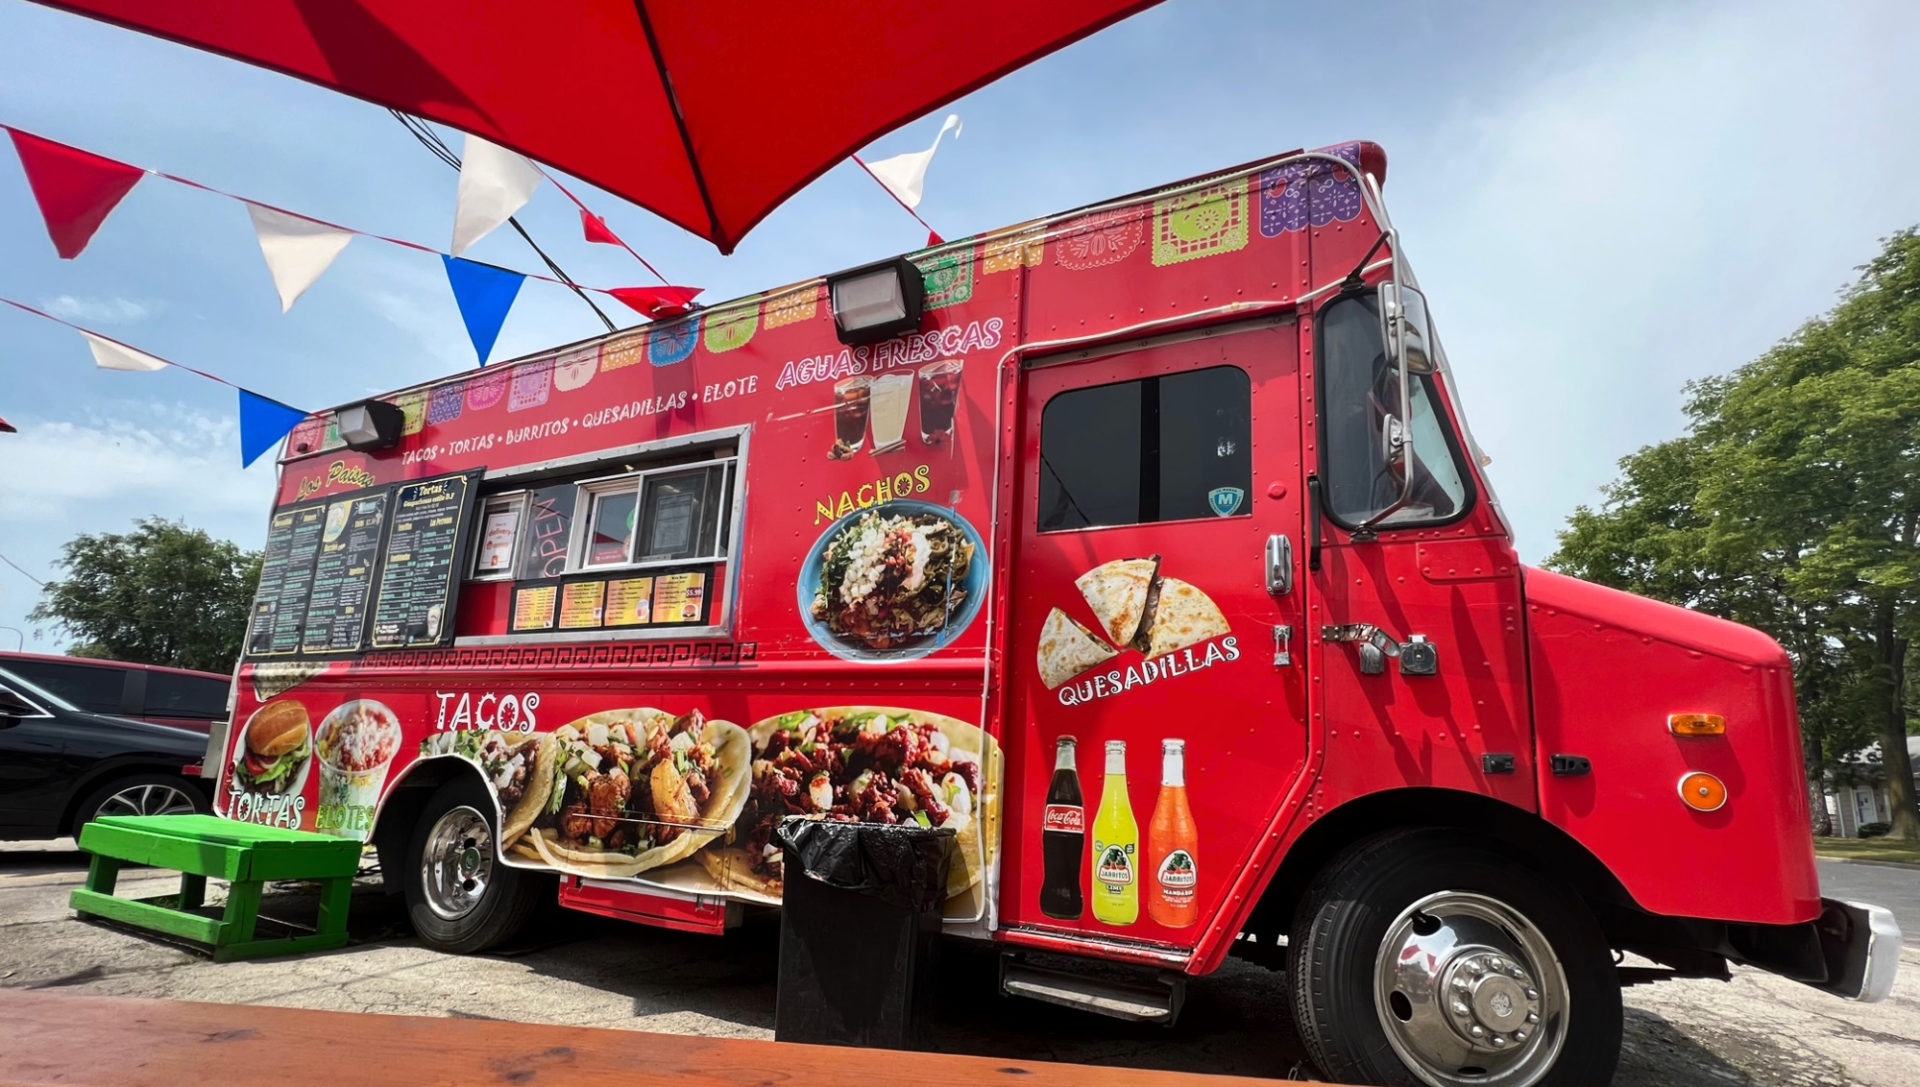 The red truck for Los Paisas food truck on Cunningham Avenue in Champaign. The truck has a black menu on the outside in addition to red, white, and blue pendant flags on banners connected to the umbrella tables. Photo by Alyssa Buckley.